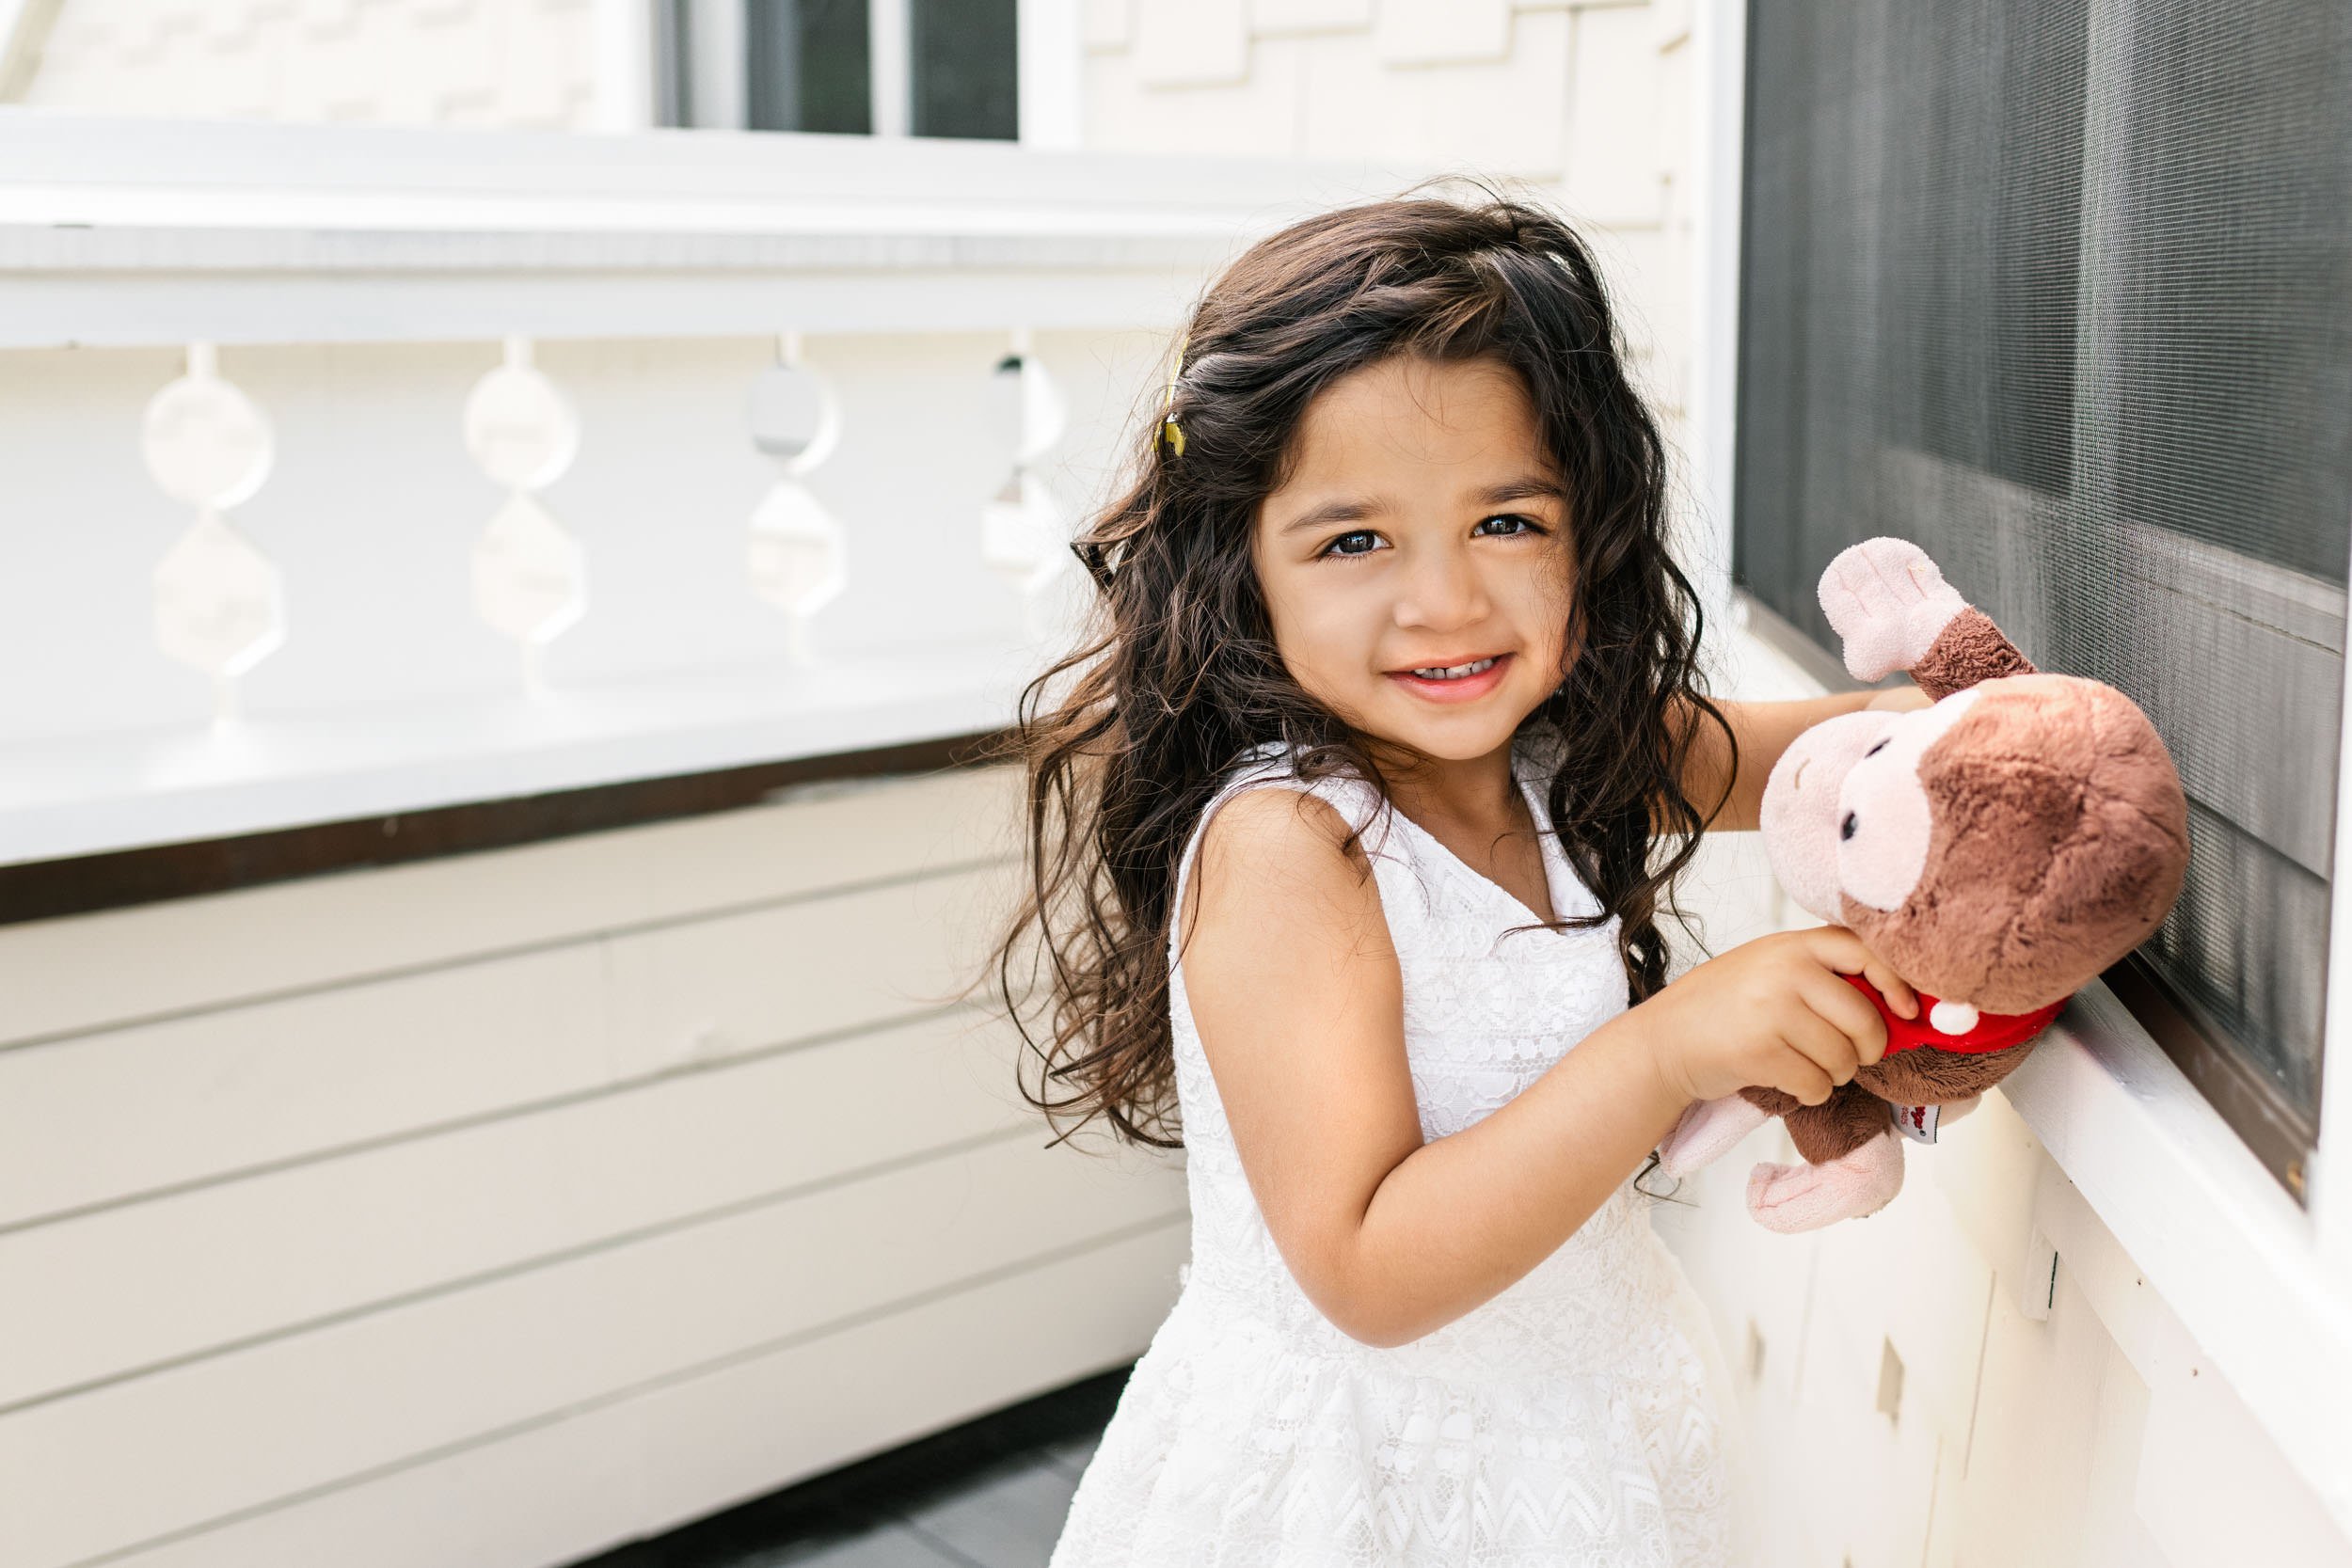  Toddler Indian girl with long and curly dark hair plays with her stuffed animal on the front porch #newjersyphotographers #njfamilyphotoographer #toddler #nicolehawkinsphotography #inhomeportraits #nicolehawkinsfamilies #glenridge #newjersey #funpos